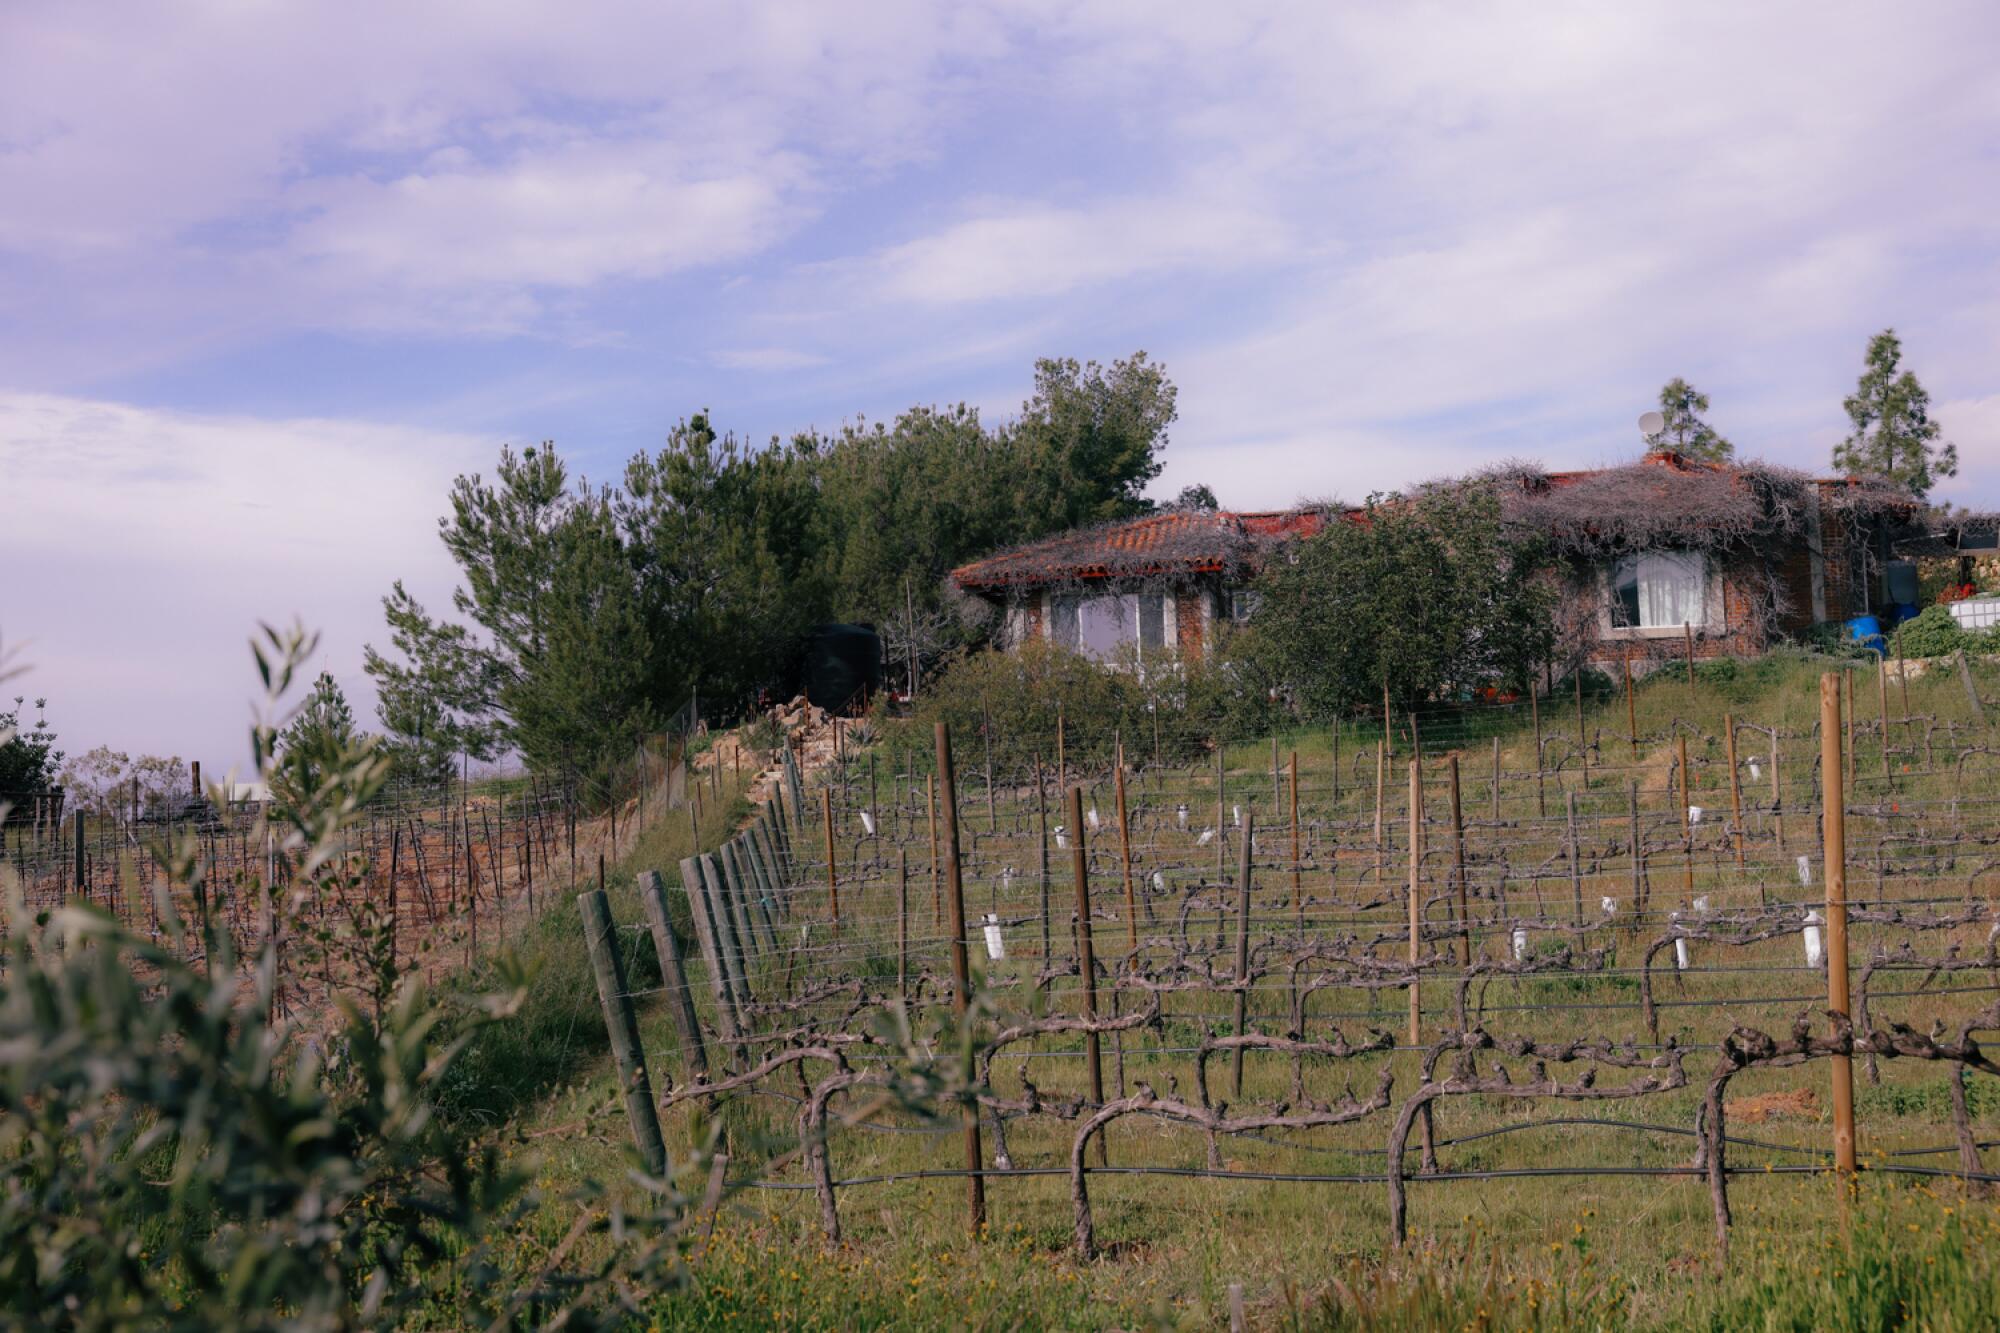 A building at the top of a hill surrounded by vineyards.